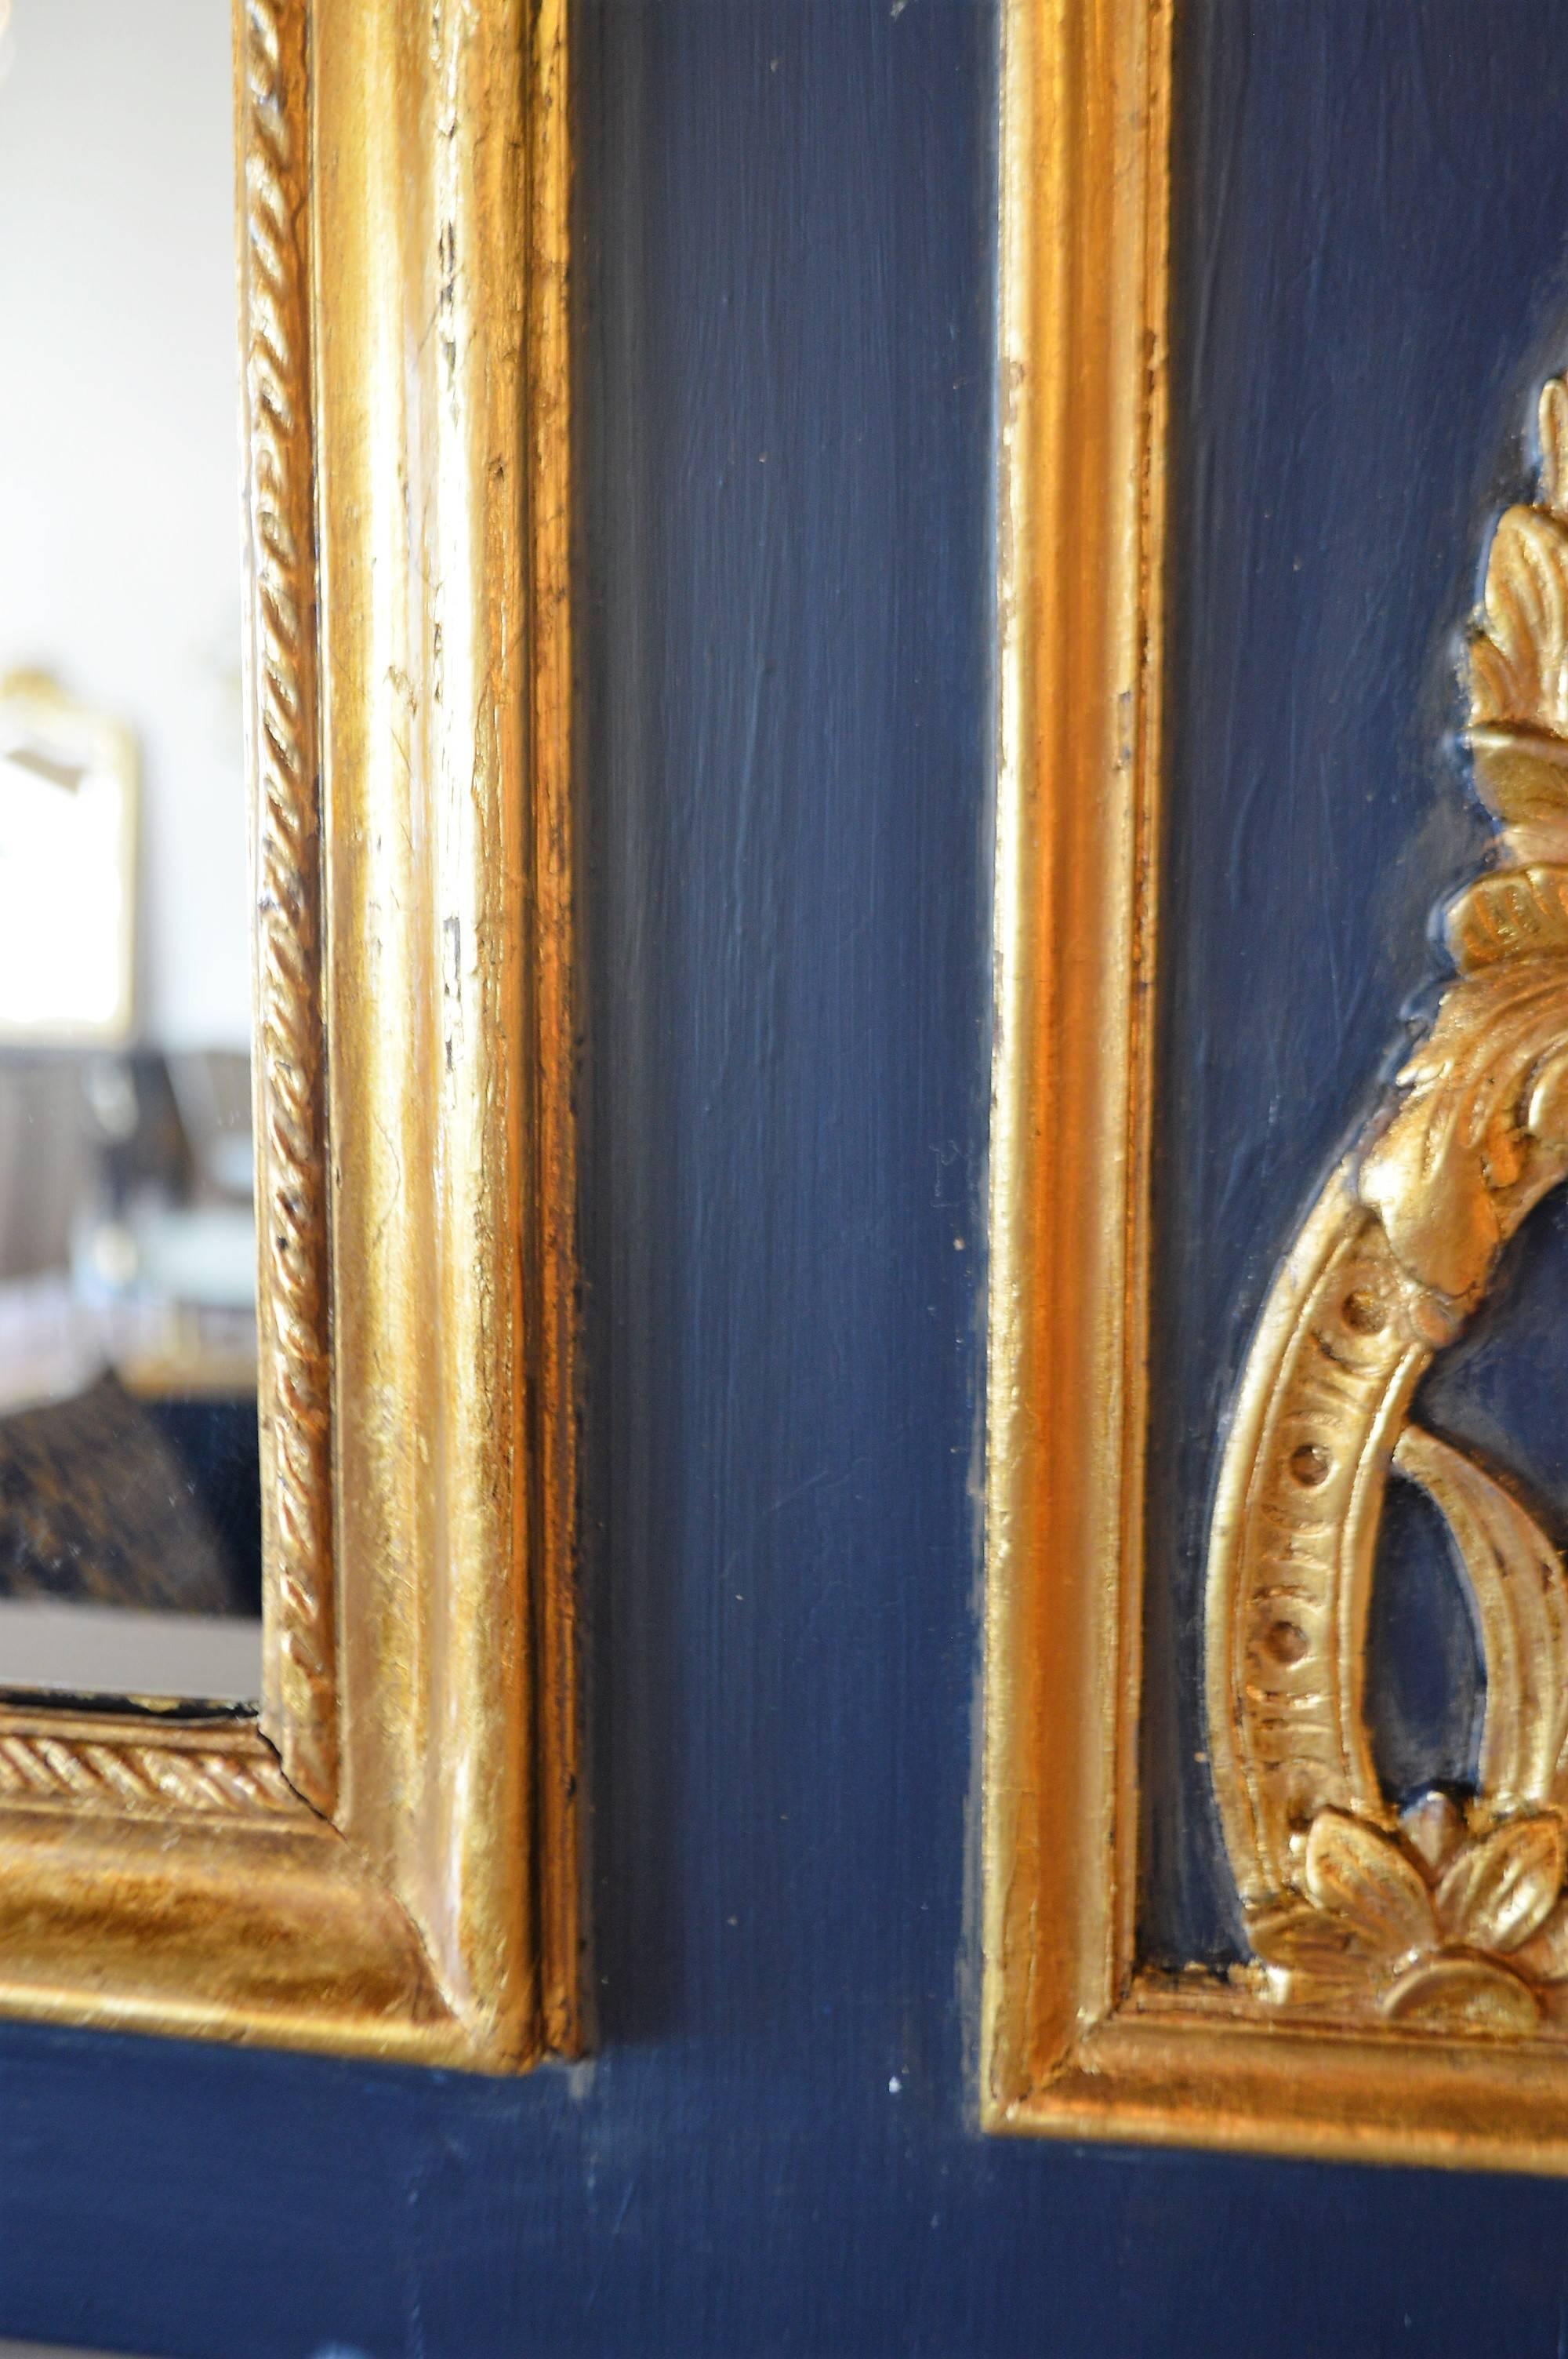 Wood Louis XVI Style Trumeau Mirror Painted Dark Blue with Gilt Details Accents